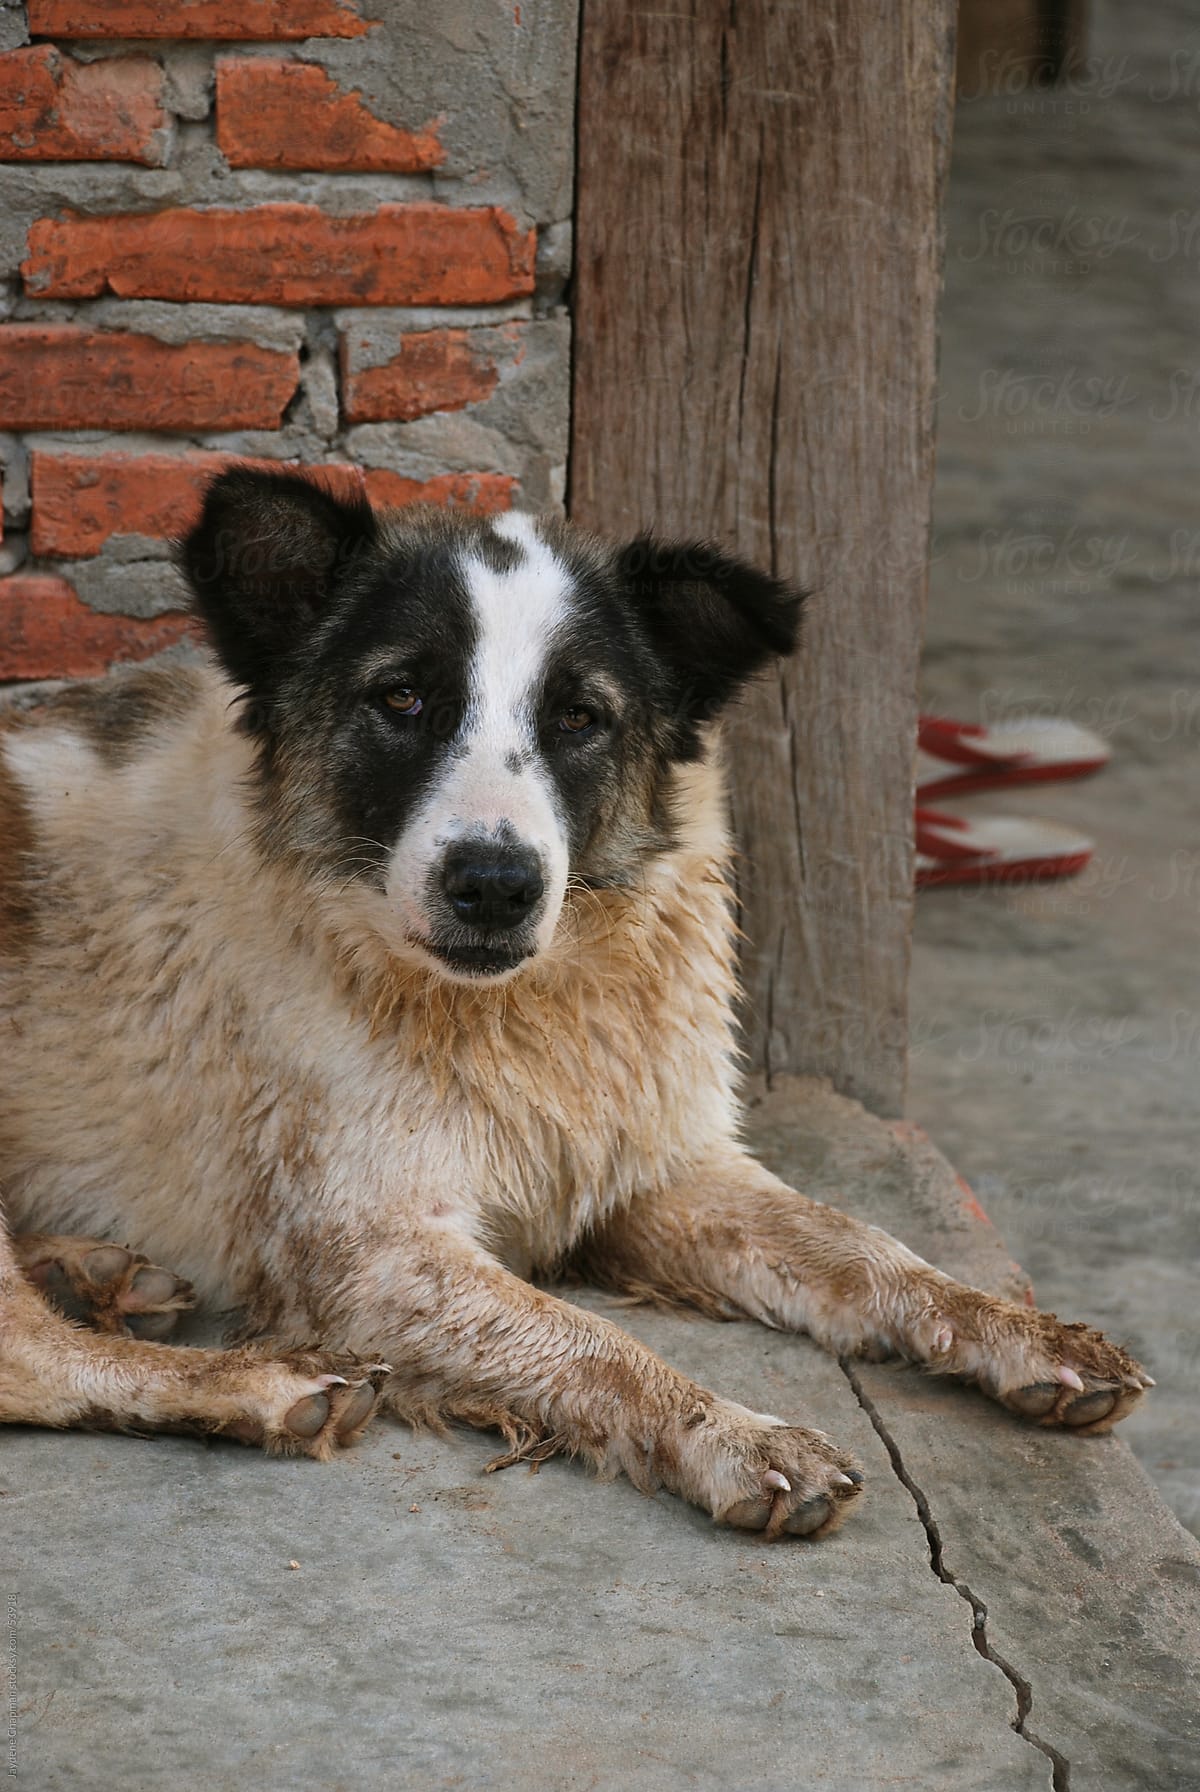 Dirty sad old dog sitting outside on the concrete, Laos, Southeast Asia